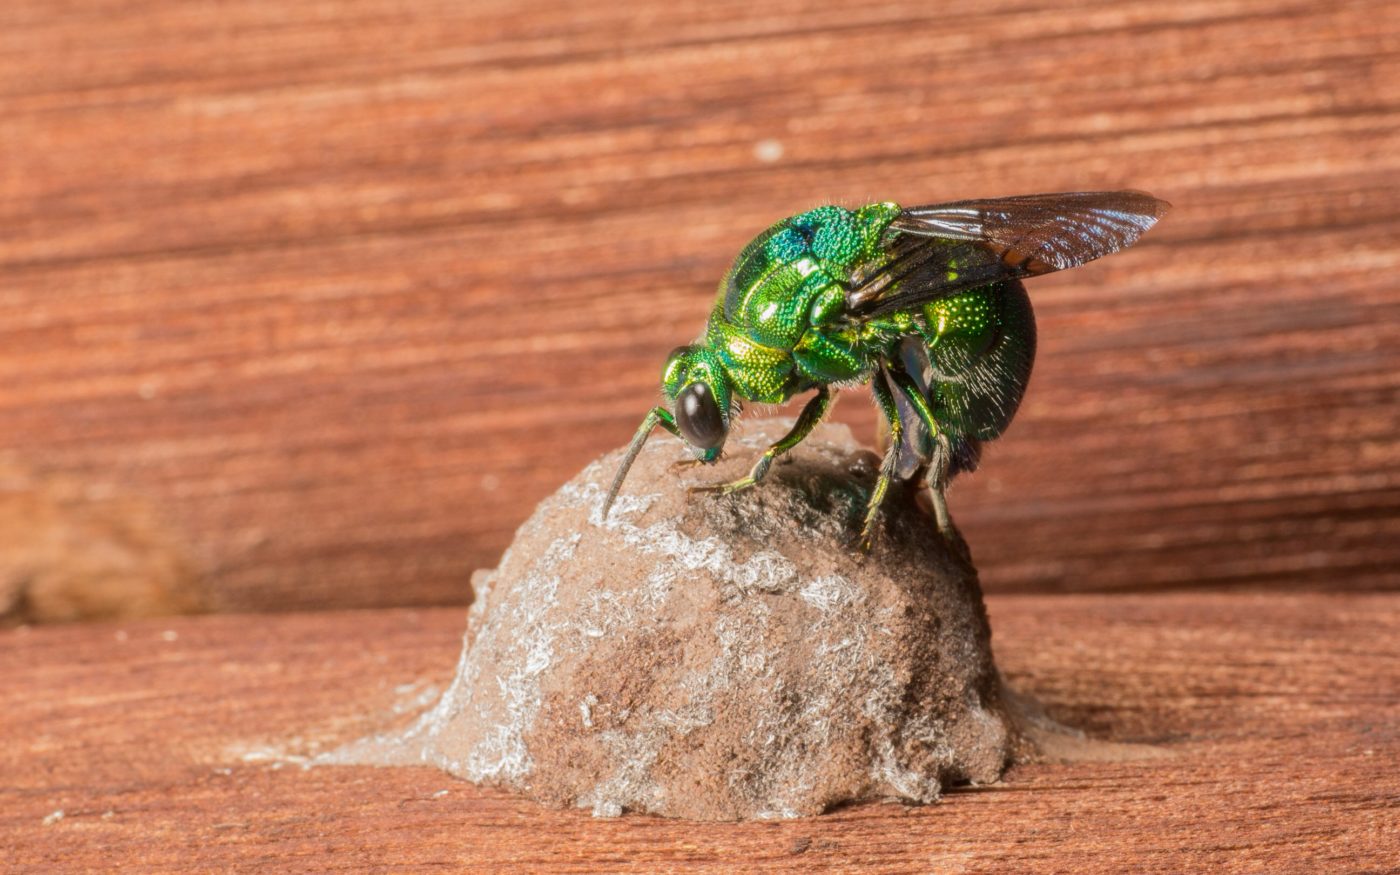 Taken at a bird hide near the Mopani Rest Camp in Kruger National Park in mid-March 2014. Kerry-Ann van Eeden observed that the cuckoo wasp inspected a few other potter wasp nests before selecting this one, chewing a small hole, e